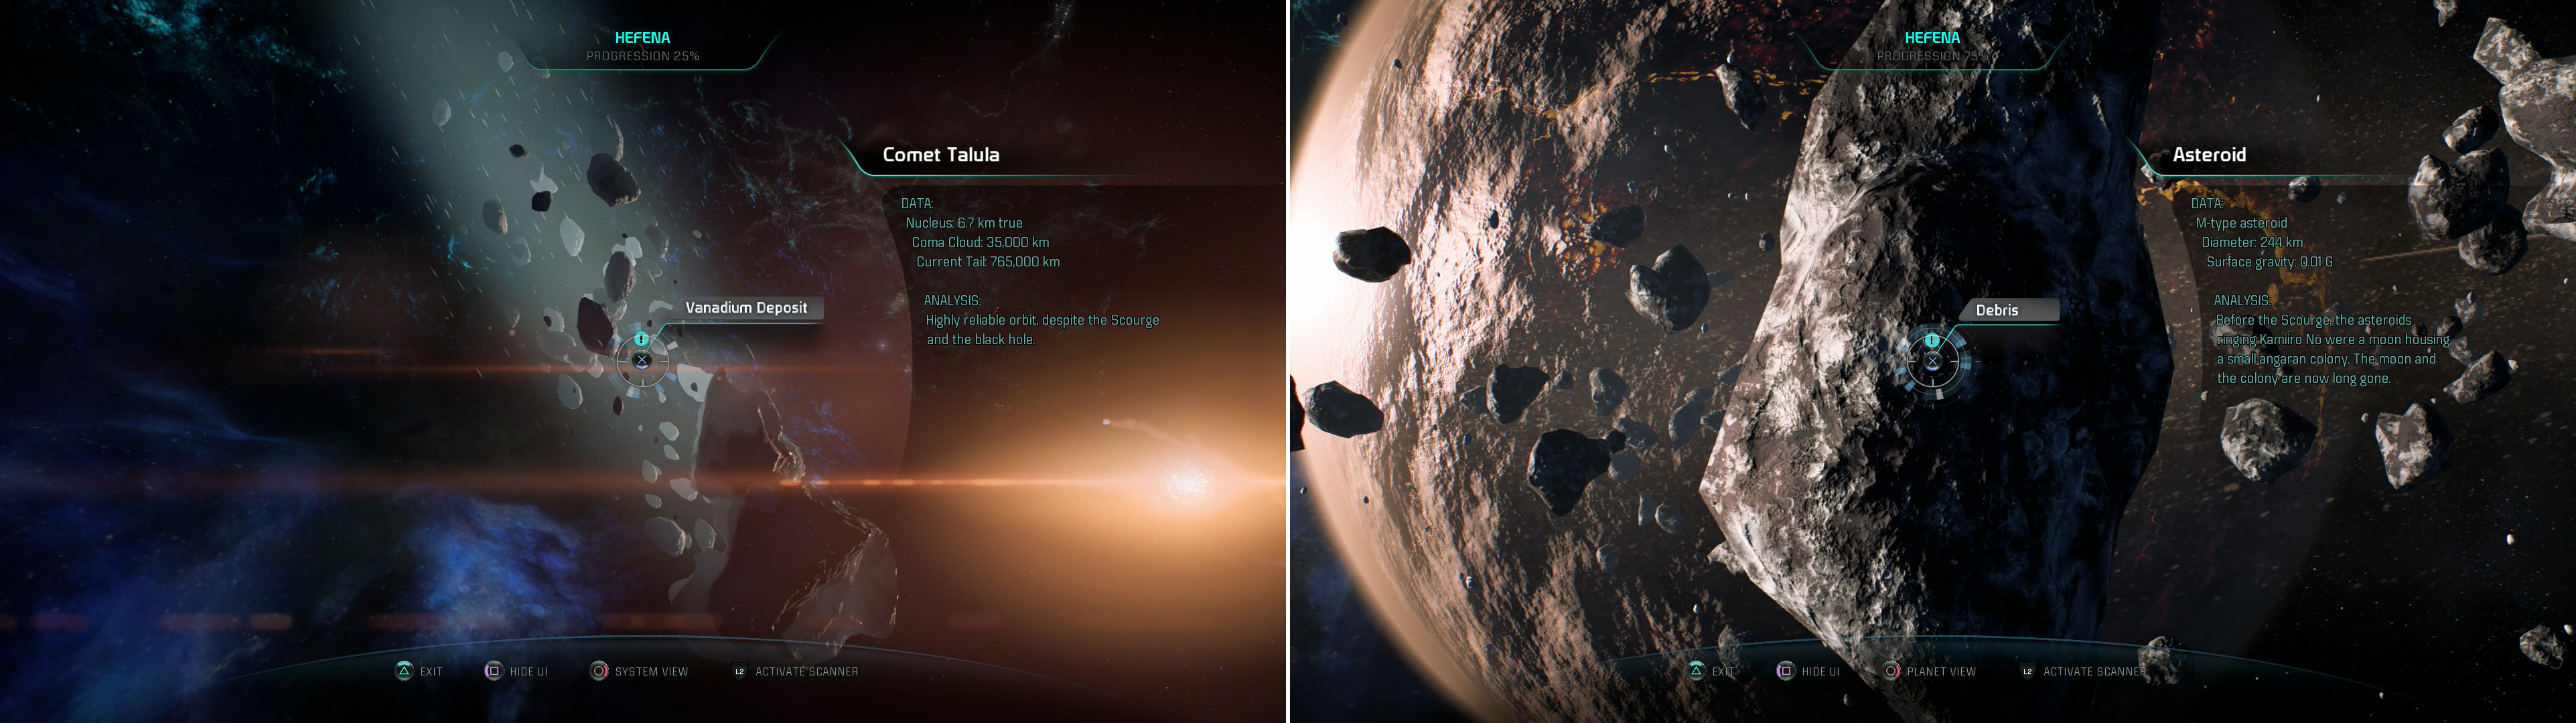 Comet Talula will bestow you with some Vanadium if you drop by (left) while an Asteroid in Kamiiro Nos ring system can be scanned for some XP (right).